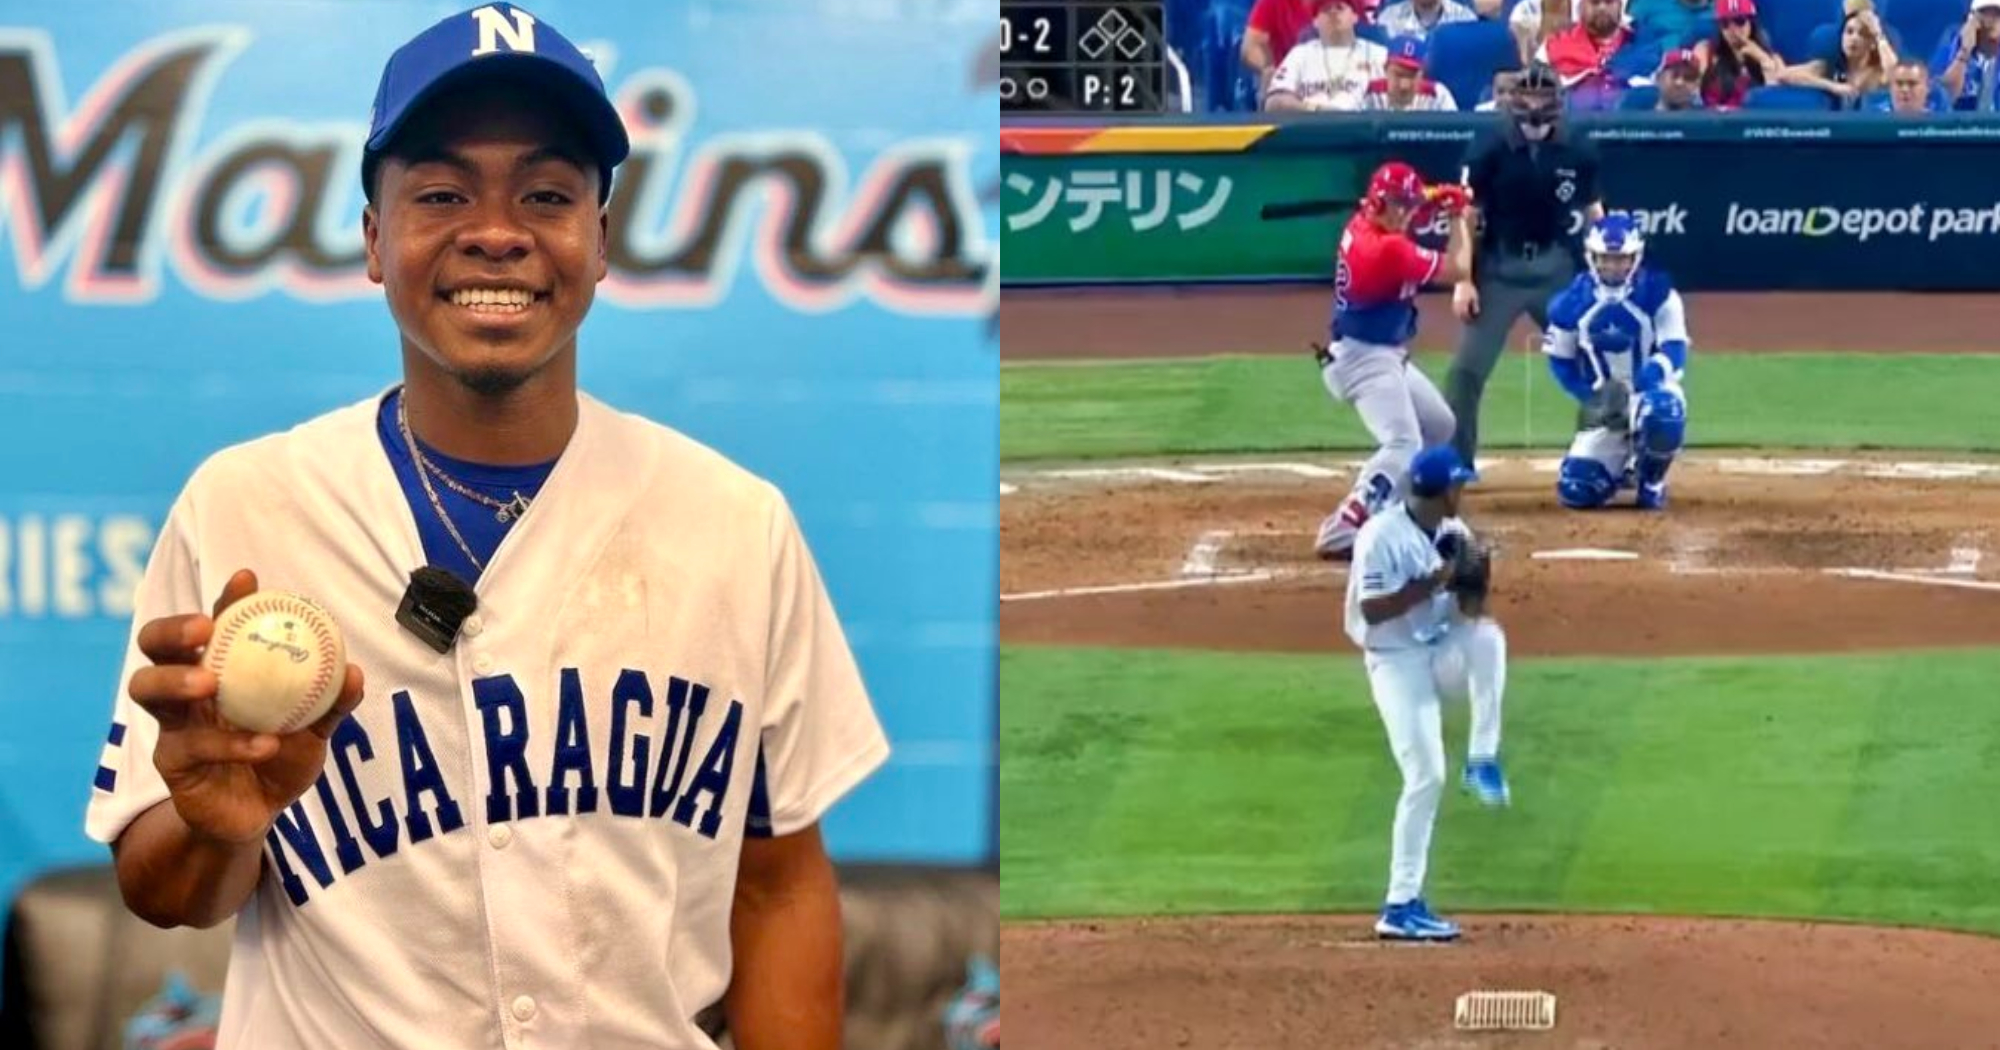 Nicaragua pitcher signs with MLB's Tigers after 1 WBC inning